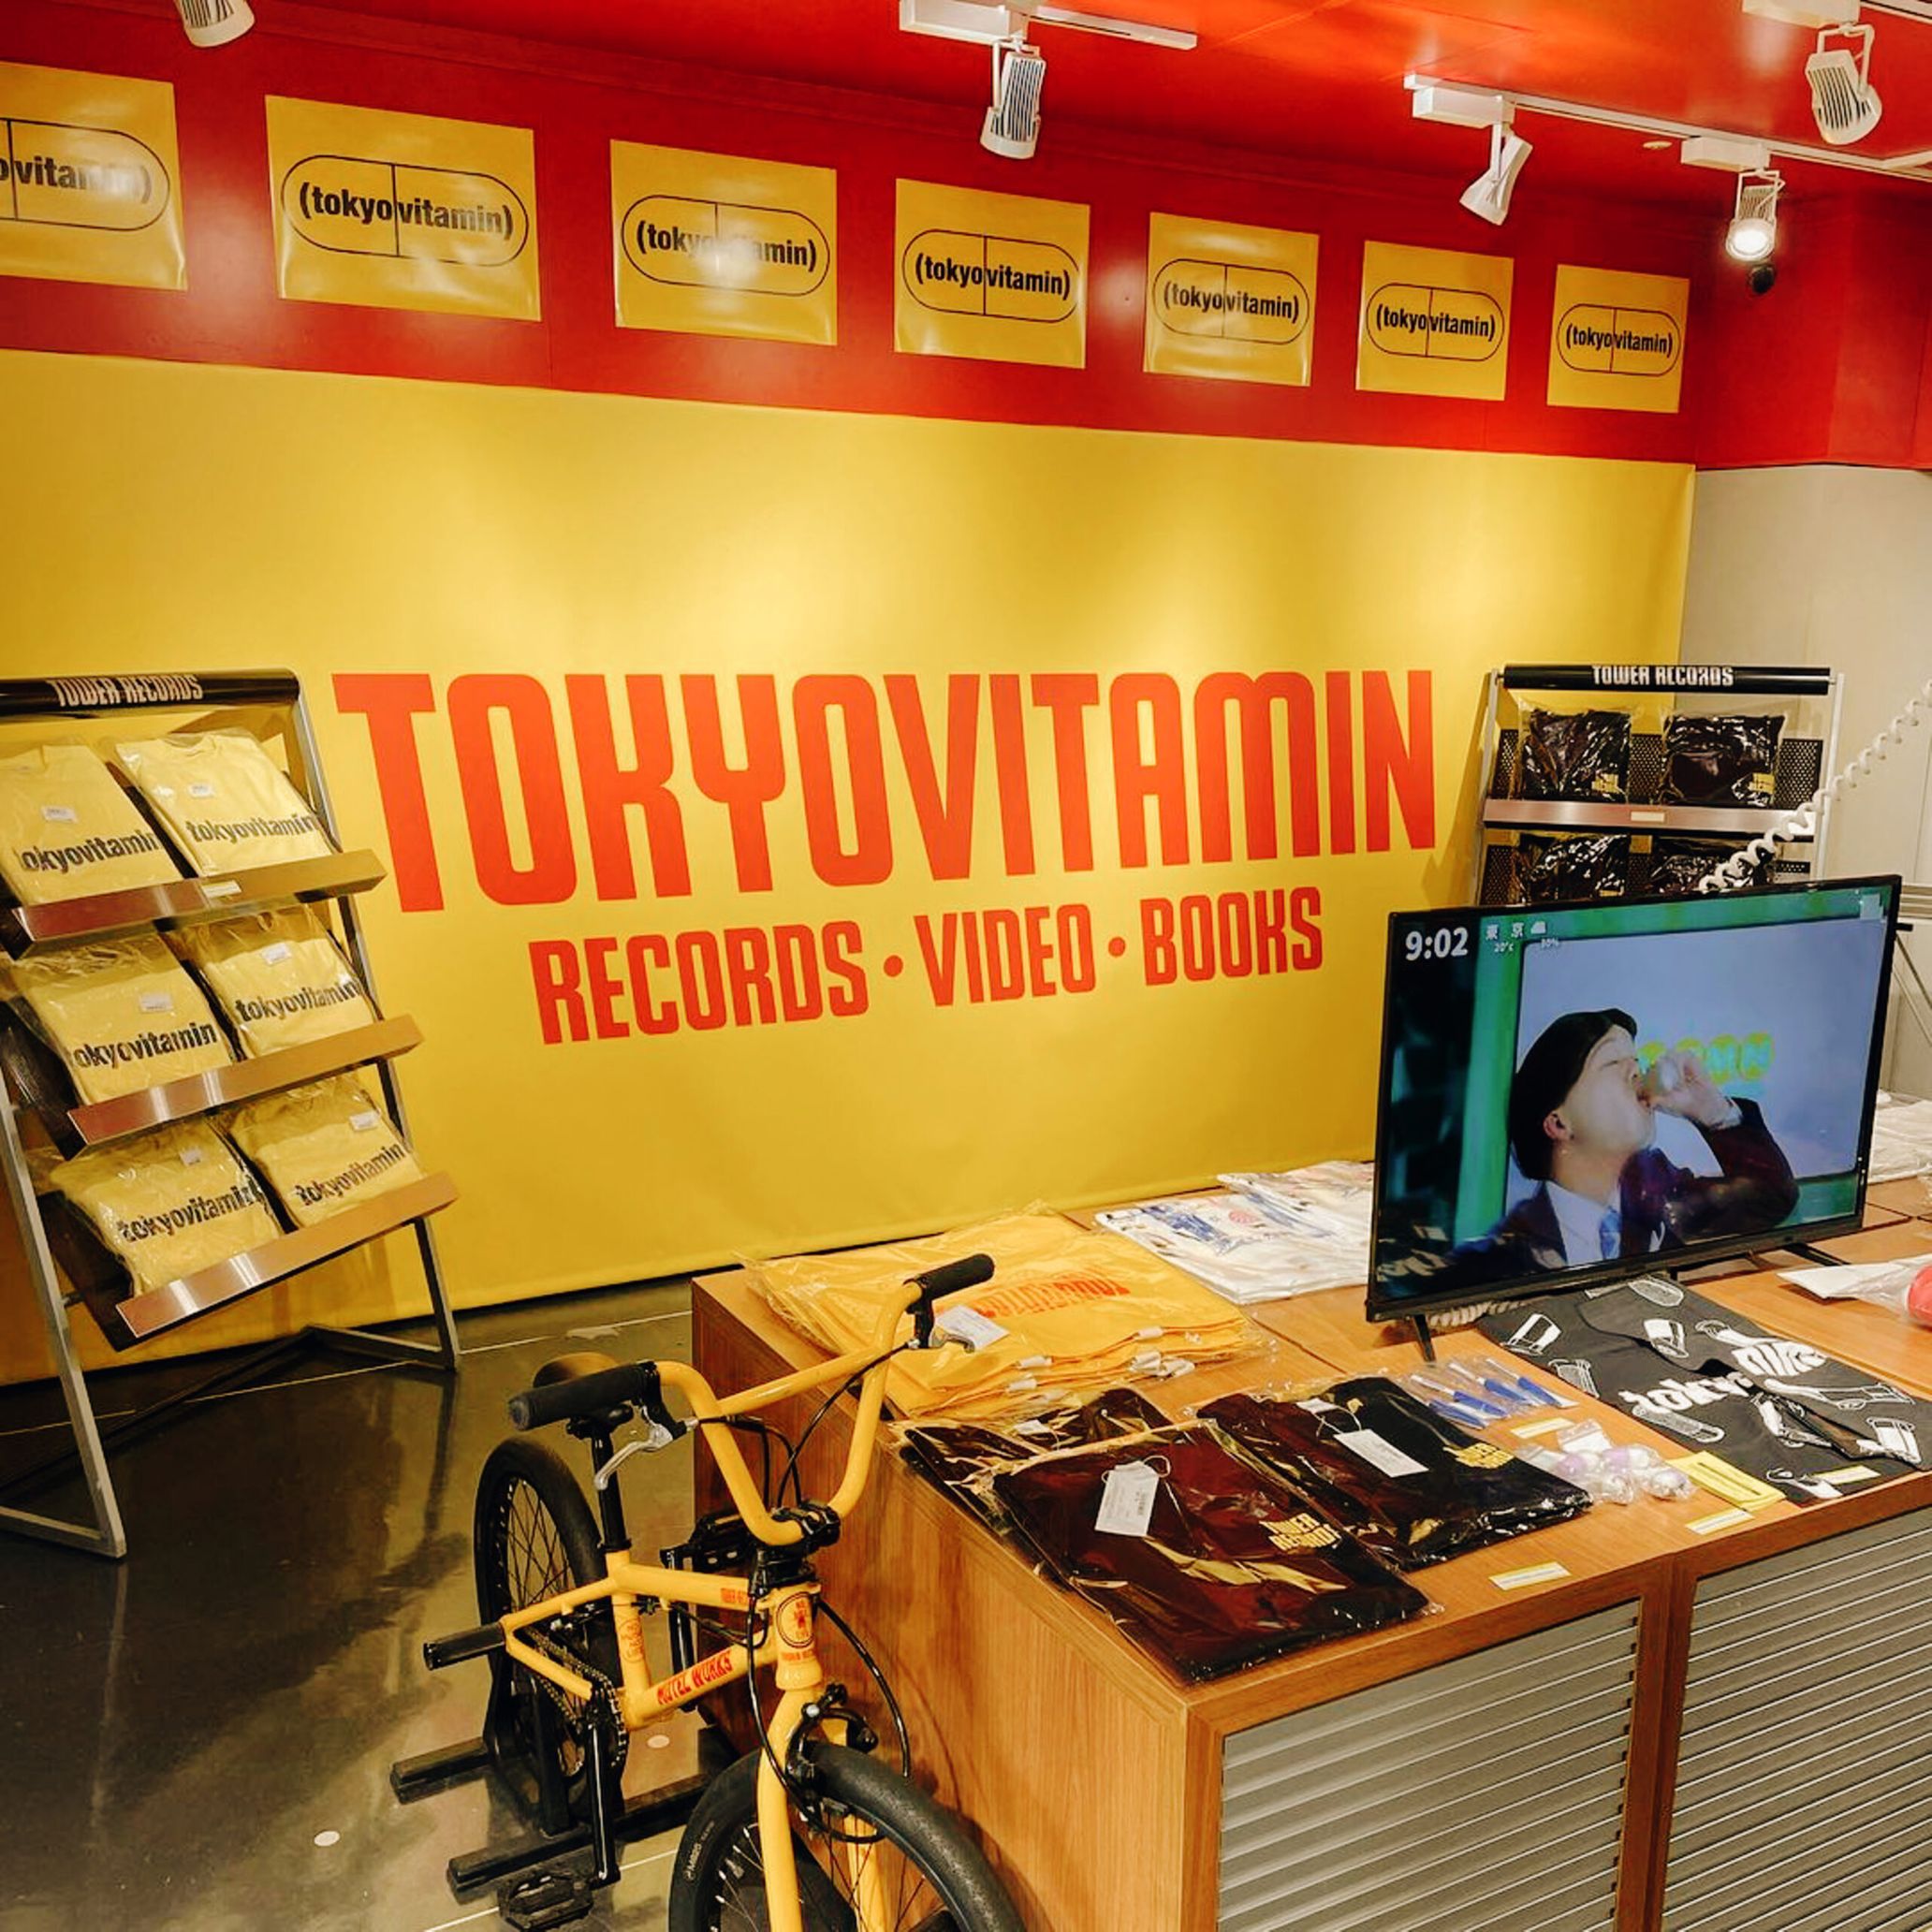 Pop-up store at Tower Records Shibuya (from tokyovitamin’s Instagram page)